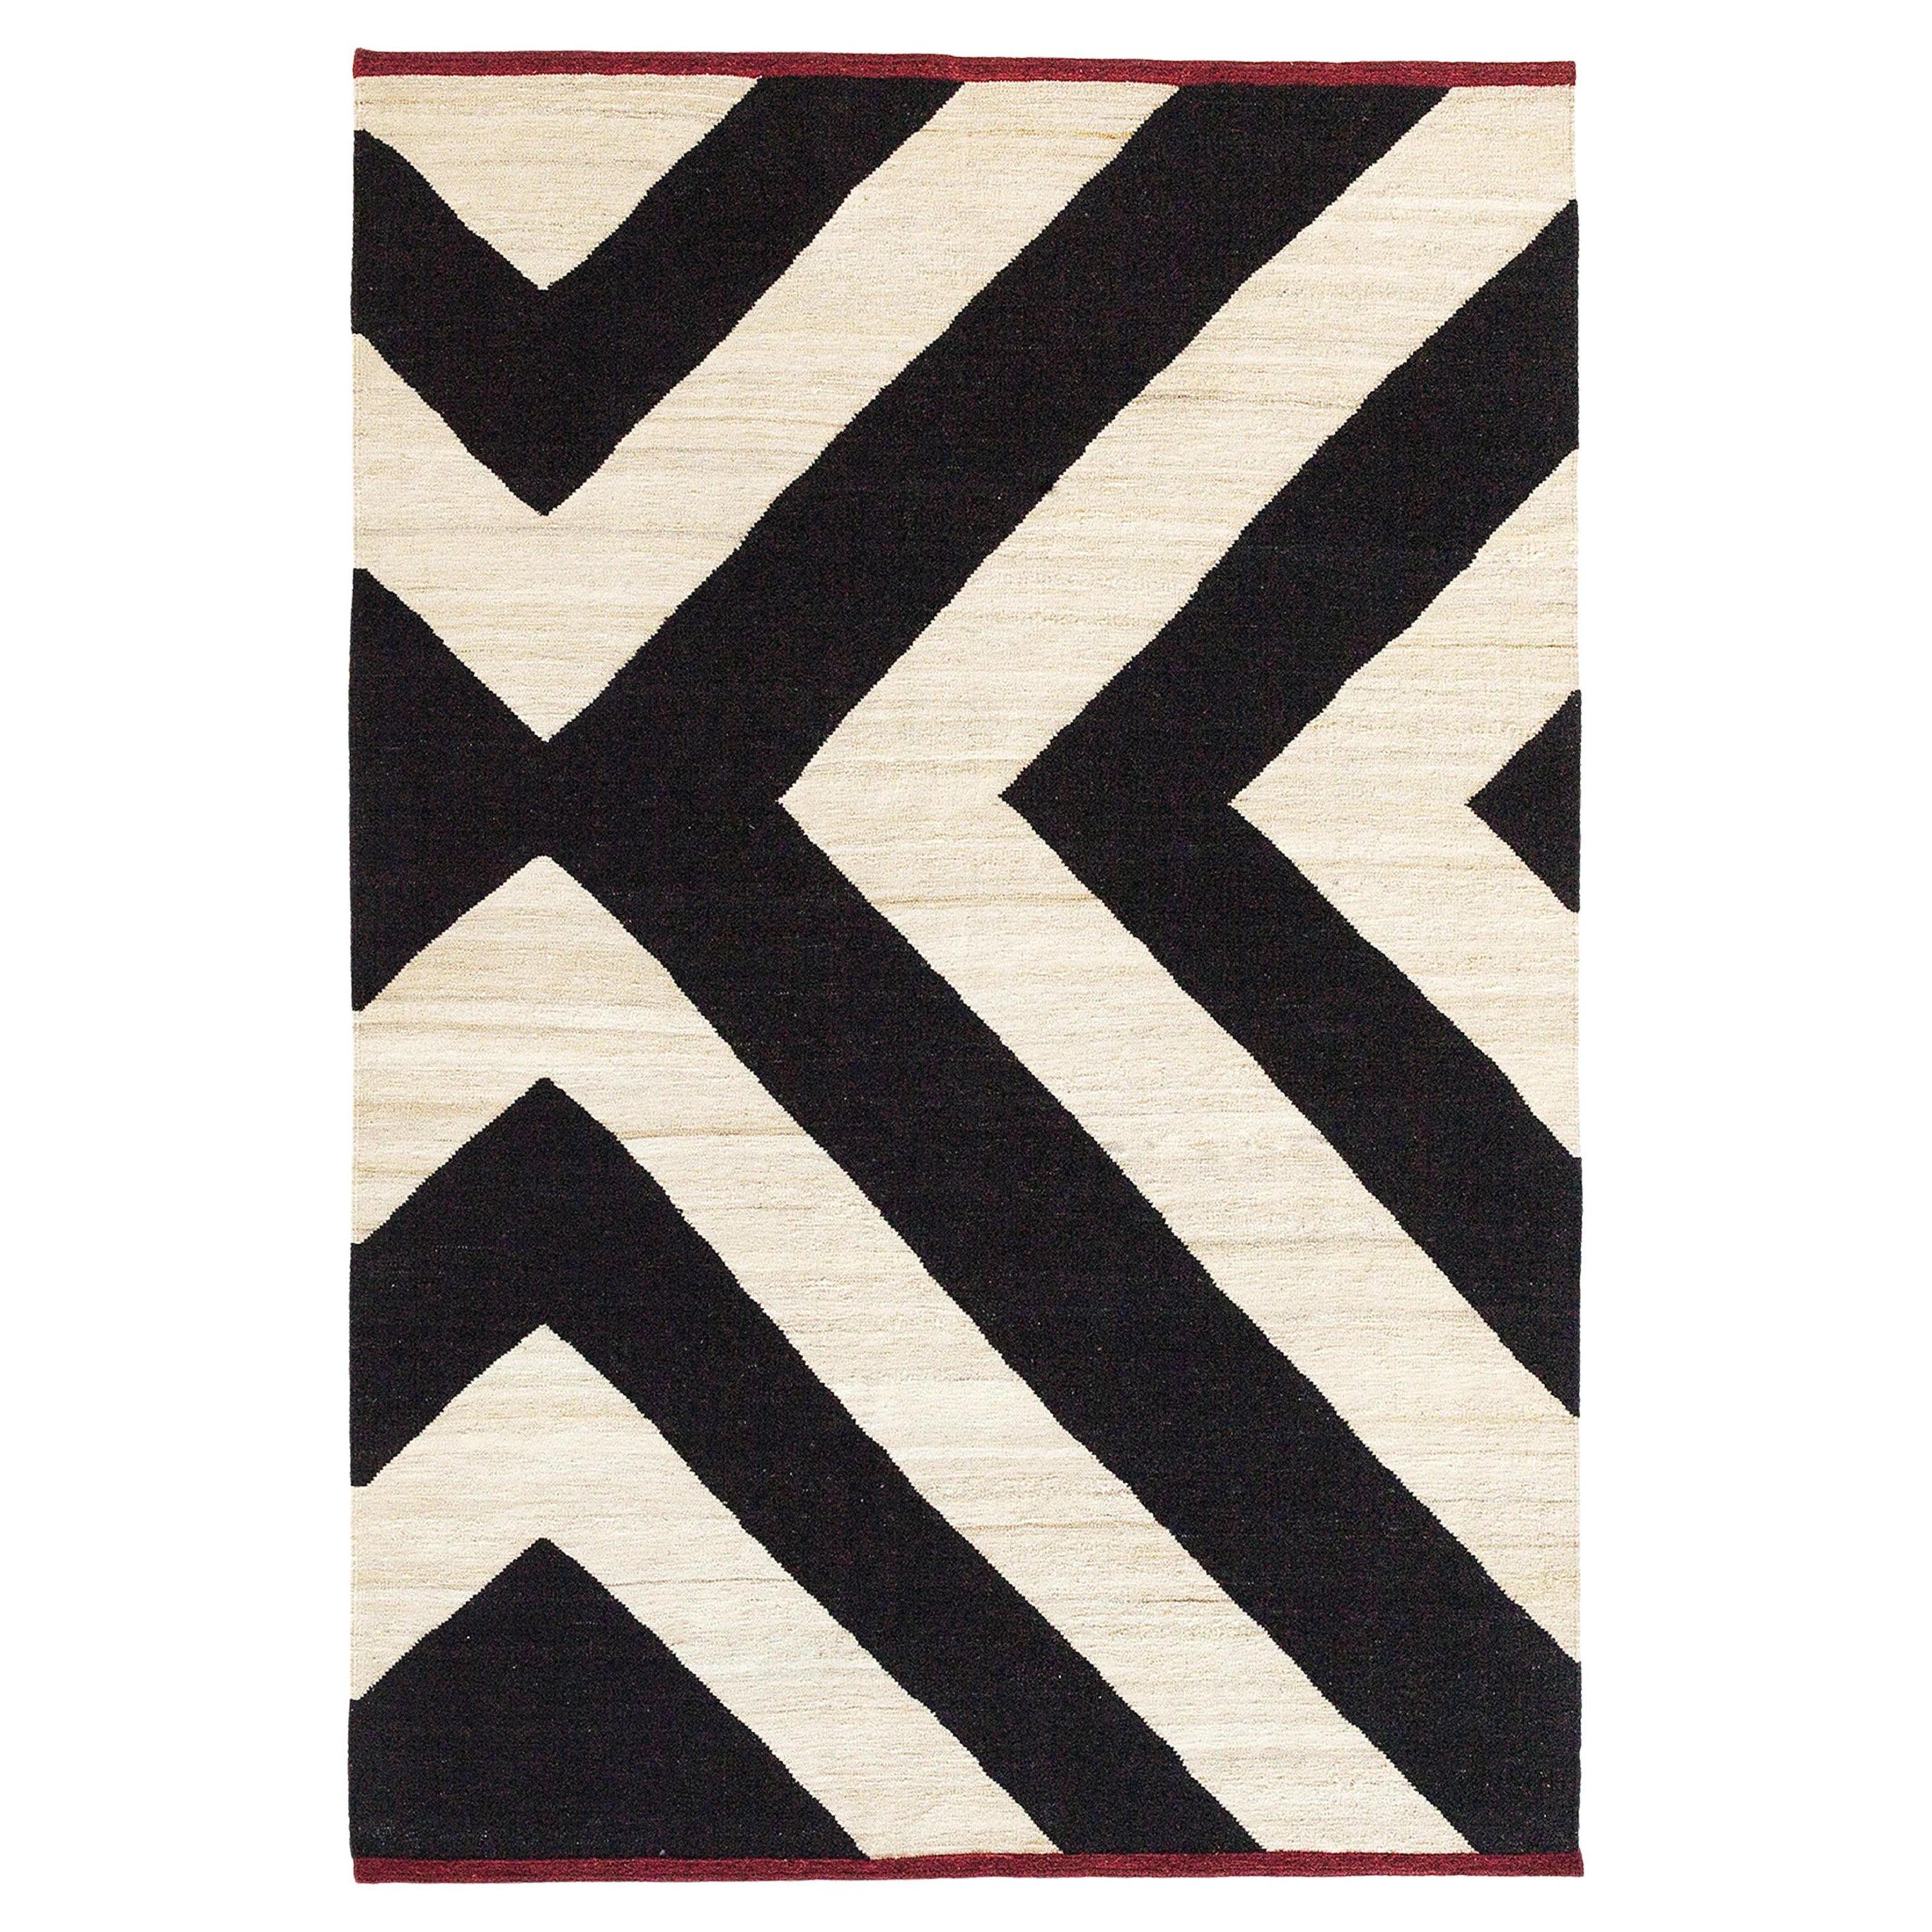 'Mélange Zoom' Hand-Loomed Rug by Sybilla for Nanimarquina For Sale